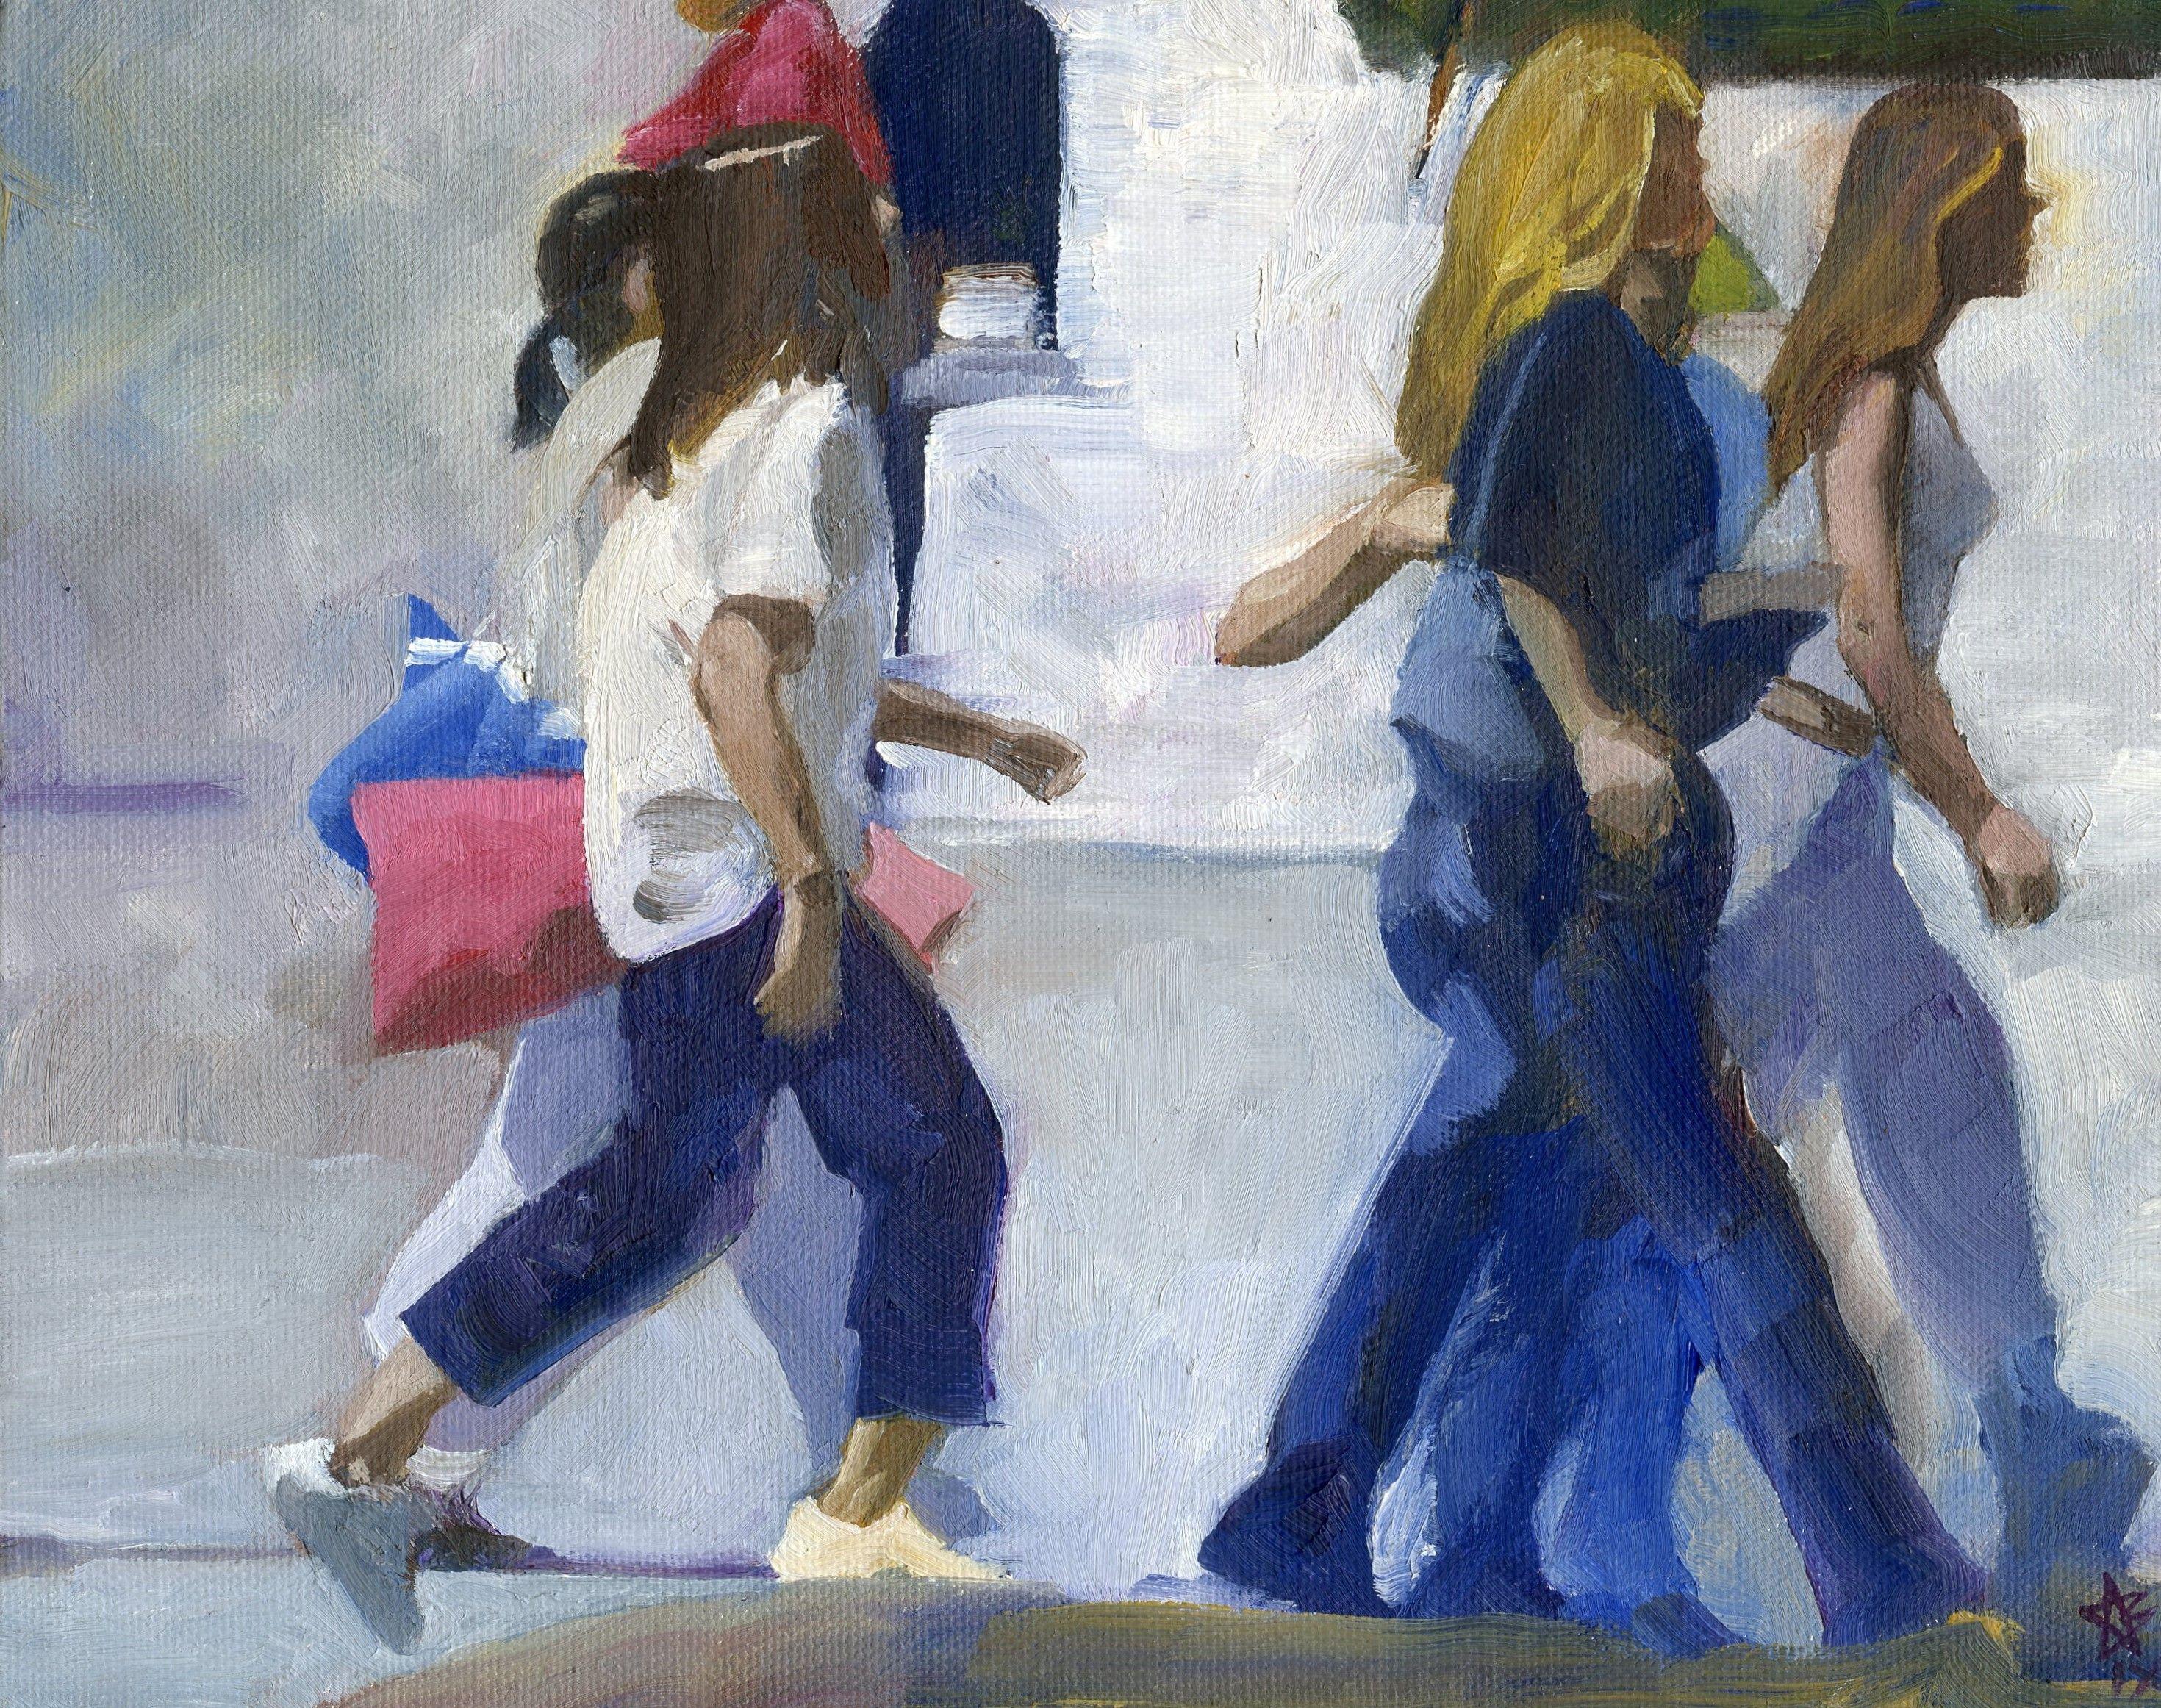 Girls going home after school cross as I am stopped at the light. They fit into a series of rectangles surrounded by light. Oil on cotton canvas stretched over pine bars, ready to hang but can be framed by the buyer. :: Painting :: Contemporary ::